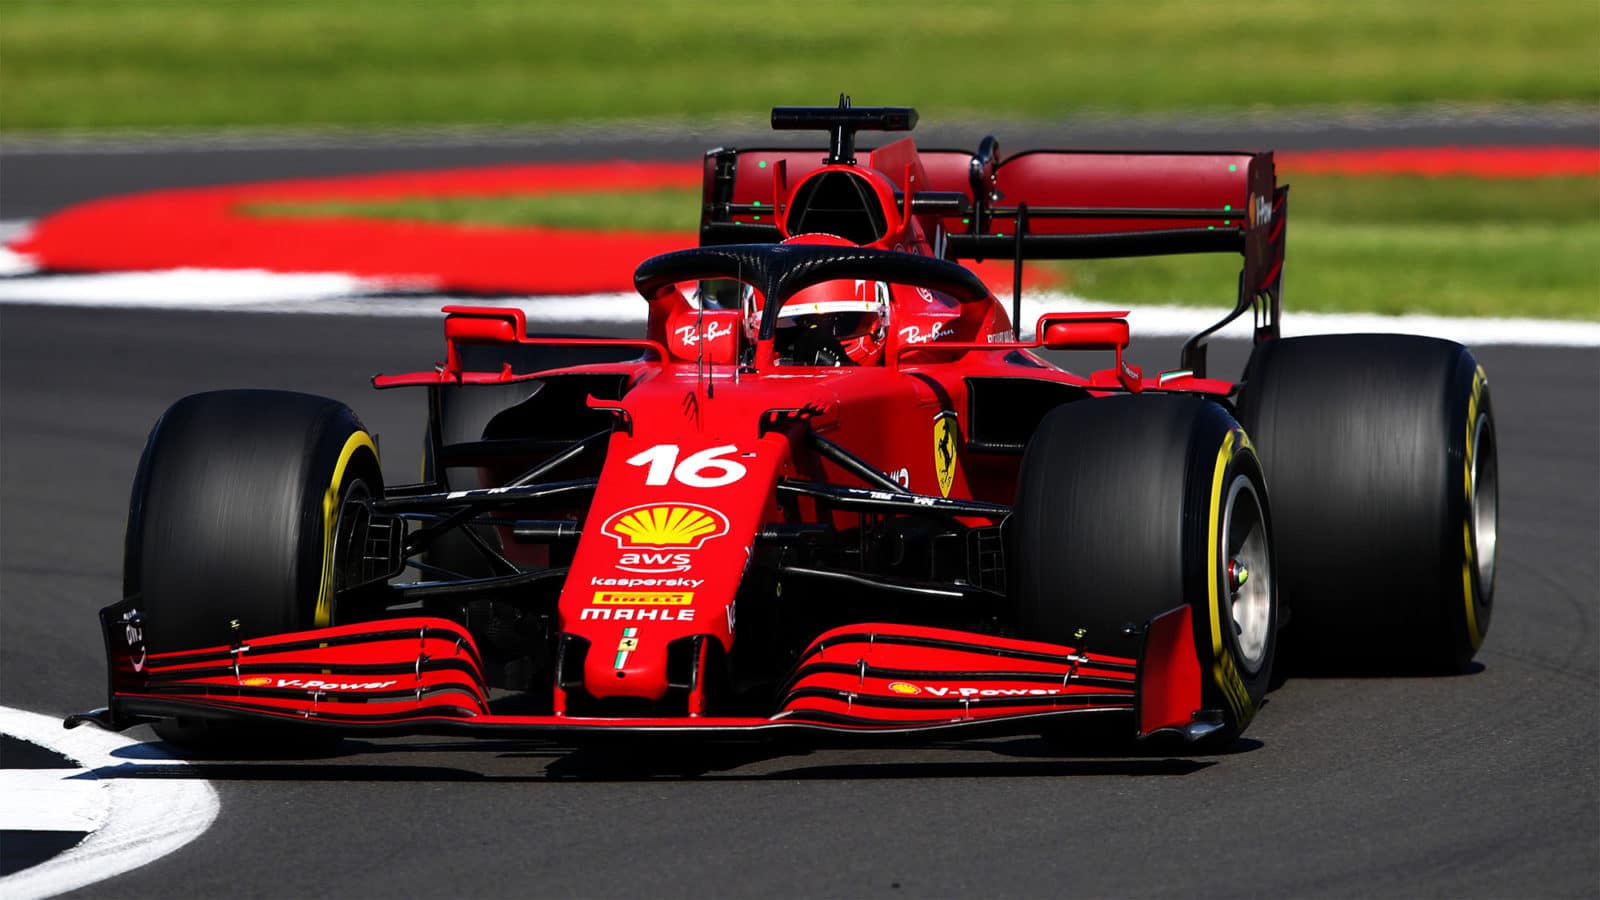 NORTHAMPTON, ENGLAND - JULY 18: Charles Leclerc of Monaco driving the (16) Scuderia Ferrari SF21 during the F1 Grand Prix of Great Britain at Silverstone on July 18, 2021 in Northampton, England. (Photo by Joe Portlock - Formula 1/Formula 1 via Getty Images)